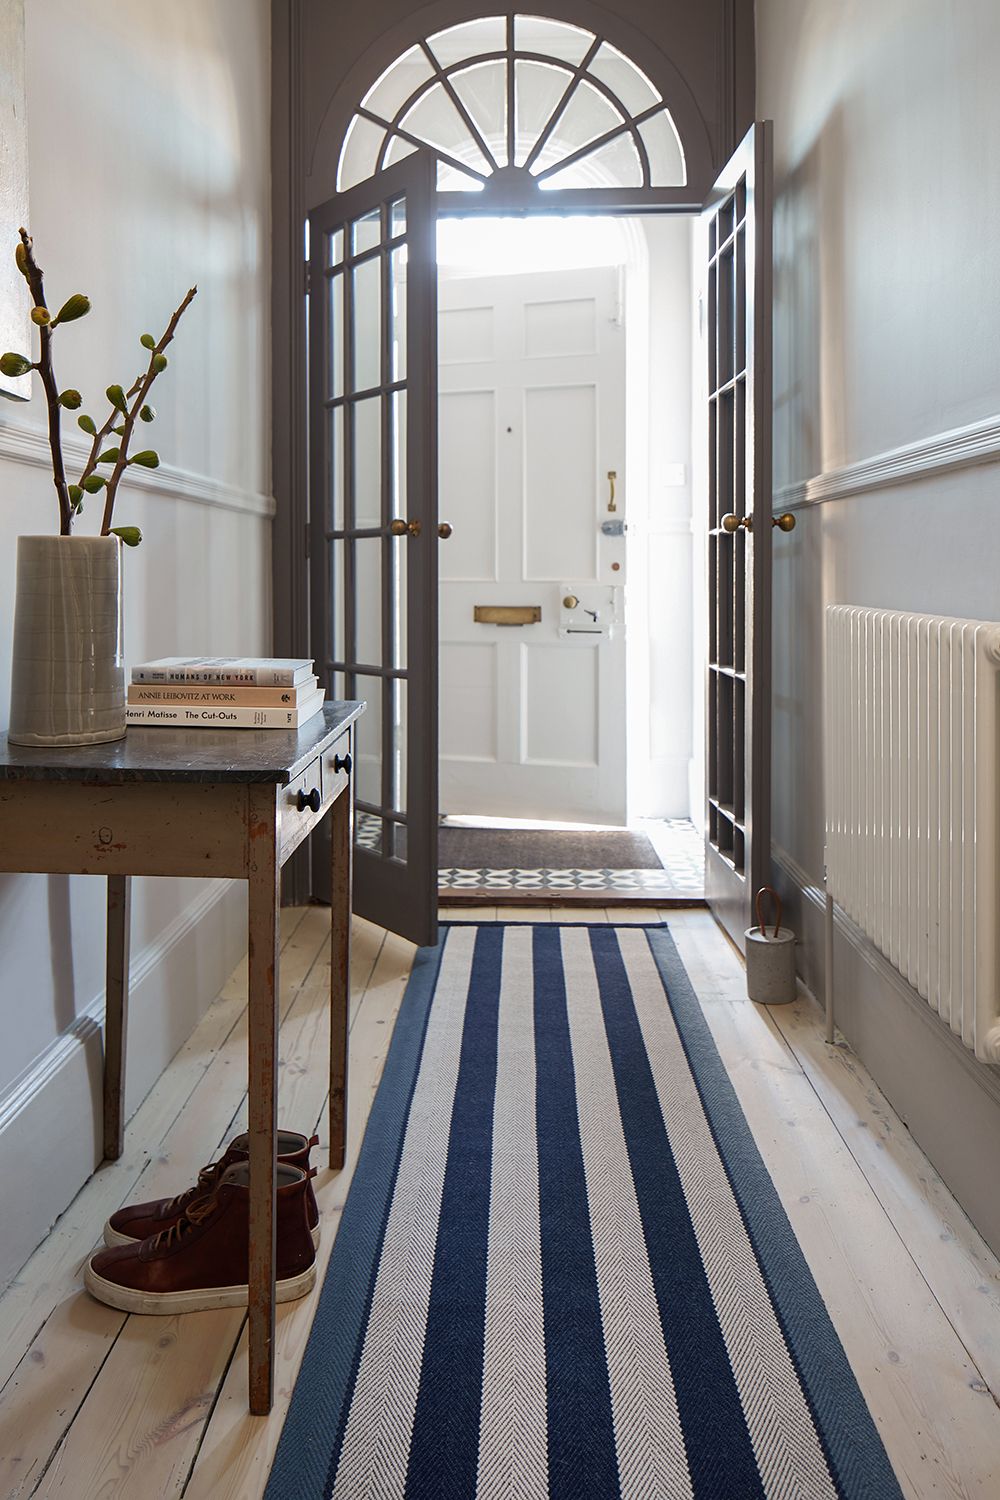 Hallway Rugs 10 Ideas To Add Style, How Do You Place A Rug In An Entryway